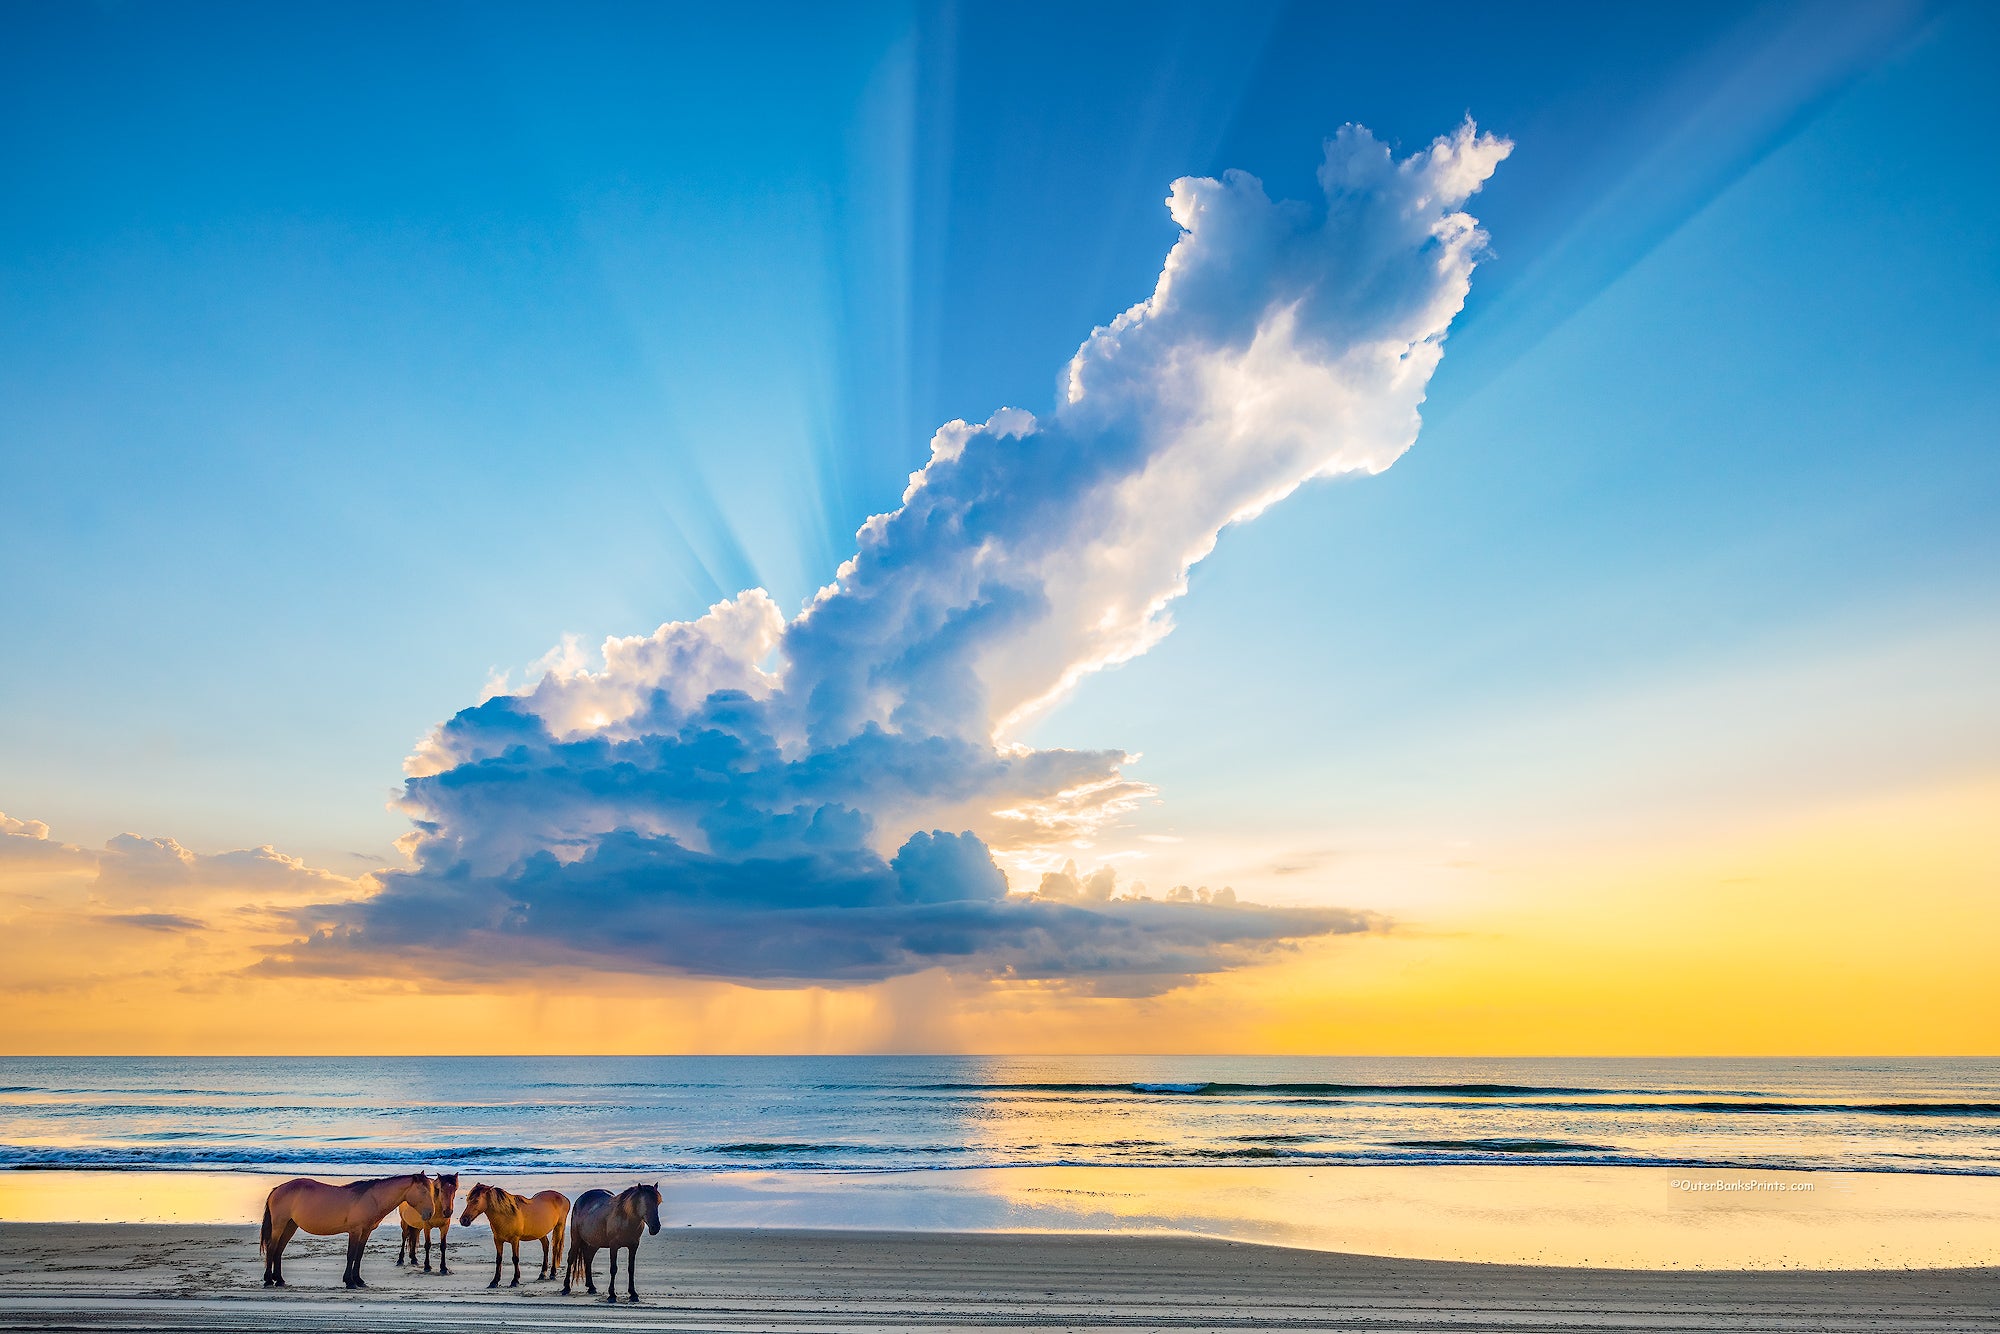 Herd of wild horses on a Outter Banks beach in Carova, NC under a magnificent morning rain cloud.